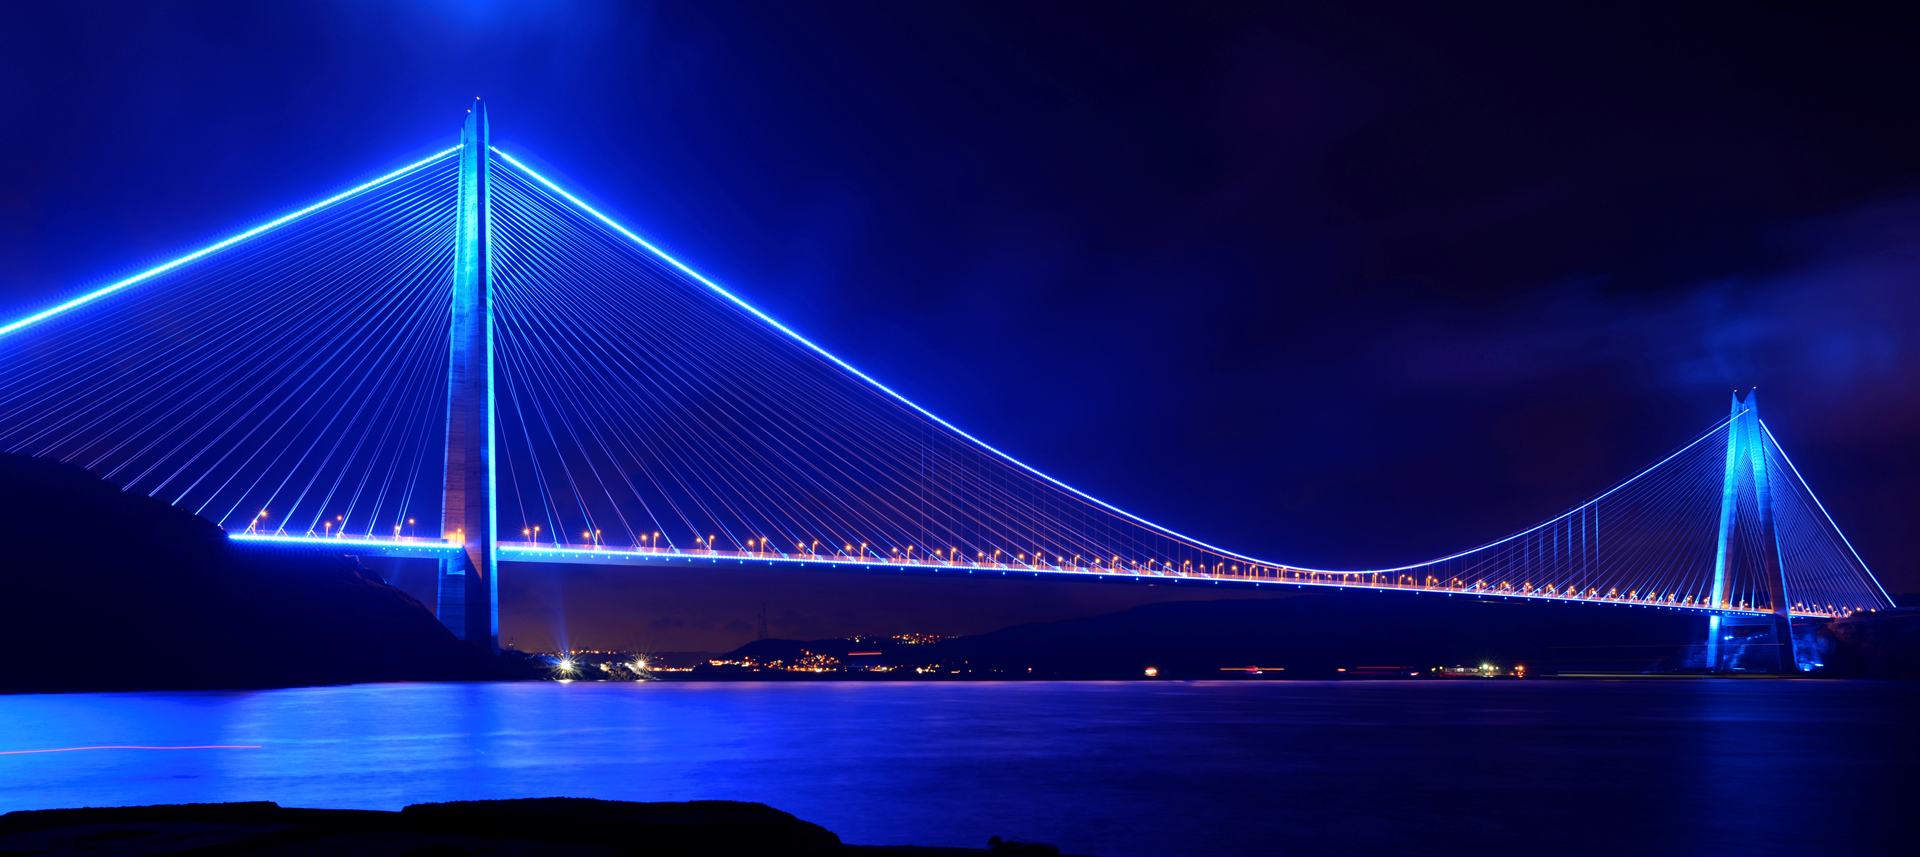 YAVUZ SULTAN SELİM BRIDGE  YAVUZ SULTAN SELİM BRIDGE  AND NORTHERN RING MOTORWAY